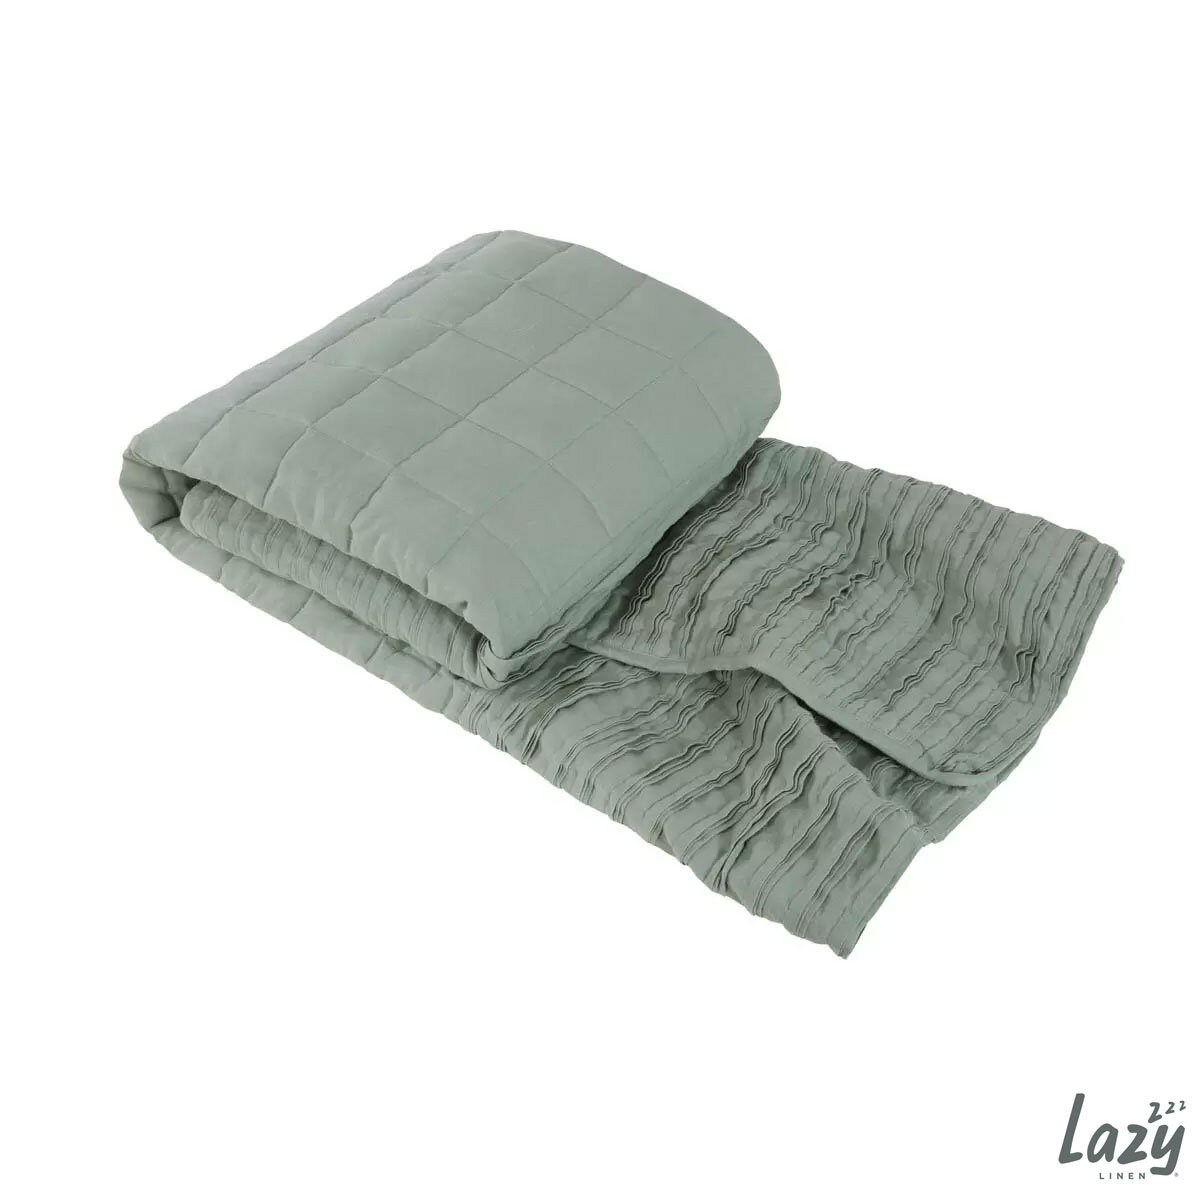 Lazy Linen 100% Washed Linen Throw in Sage Green 